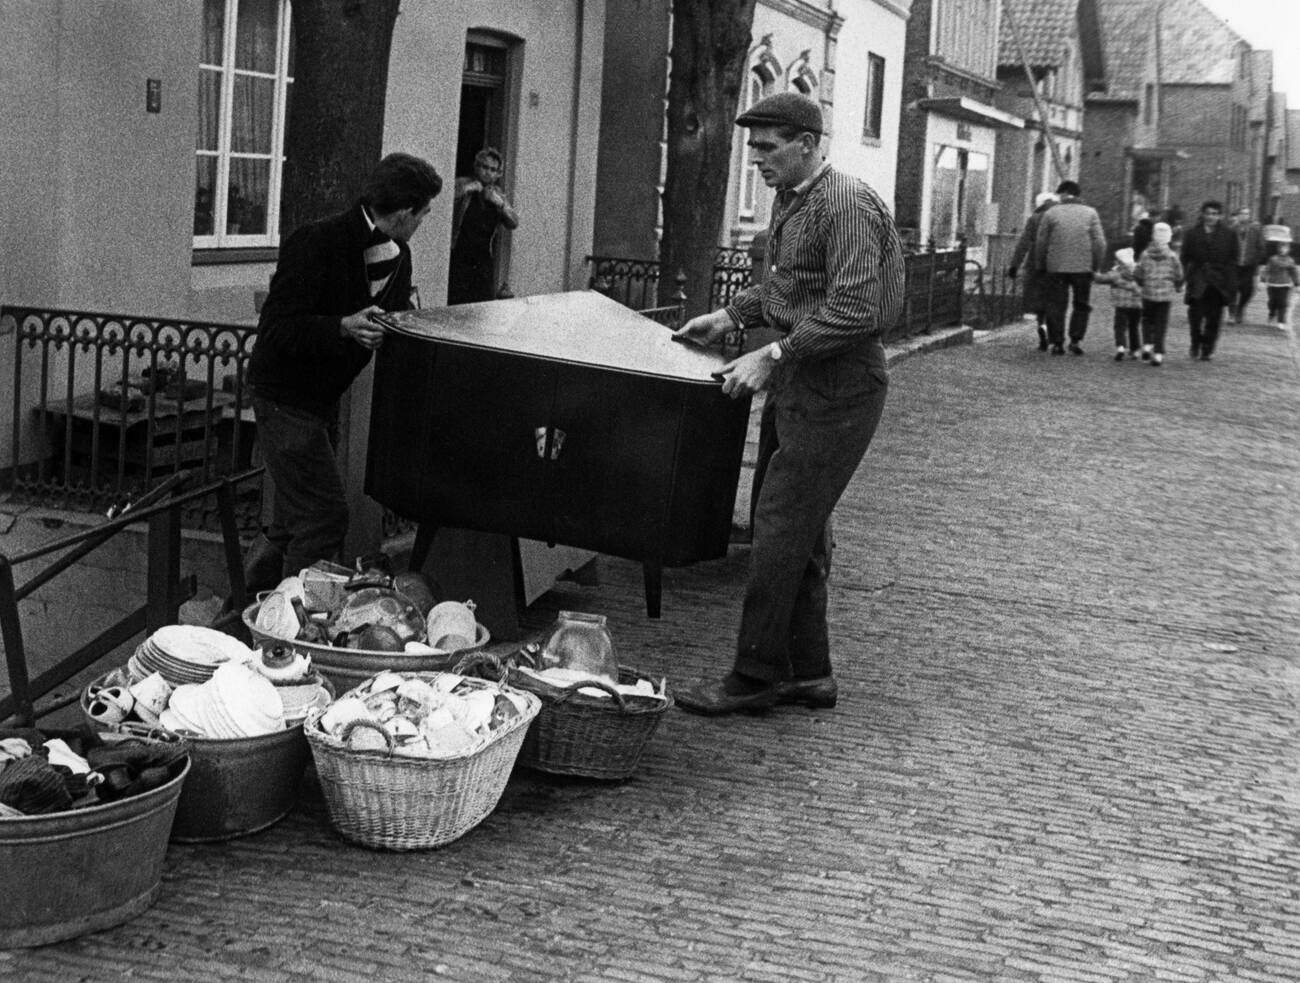 Two men carrying furniture in Finkenwerder during the North Sea Flood of 1962 in Hamburg, West Germany